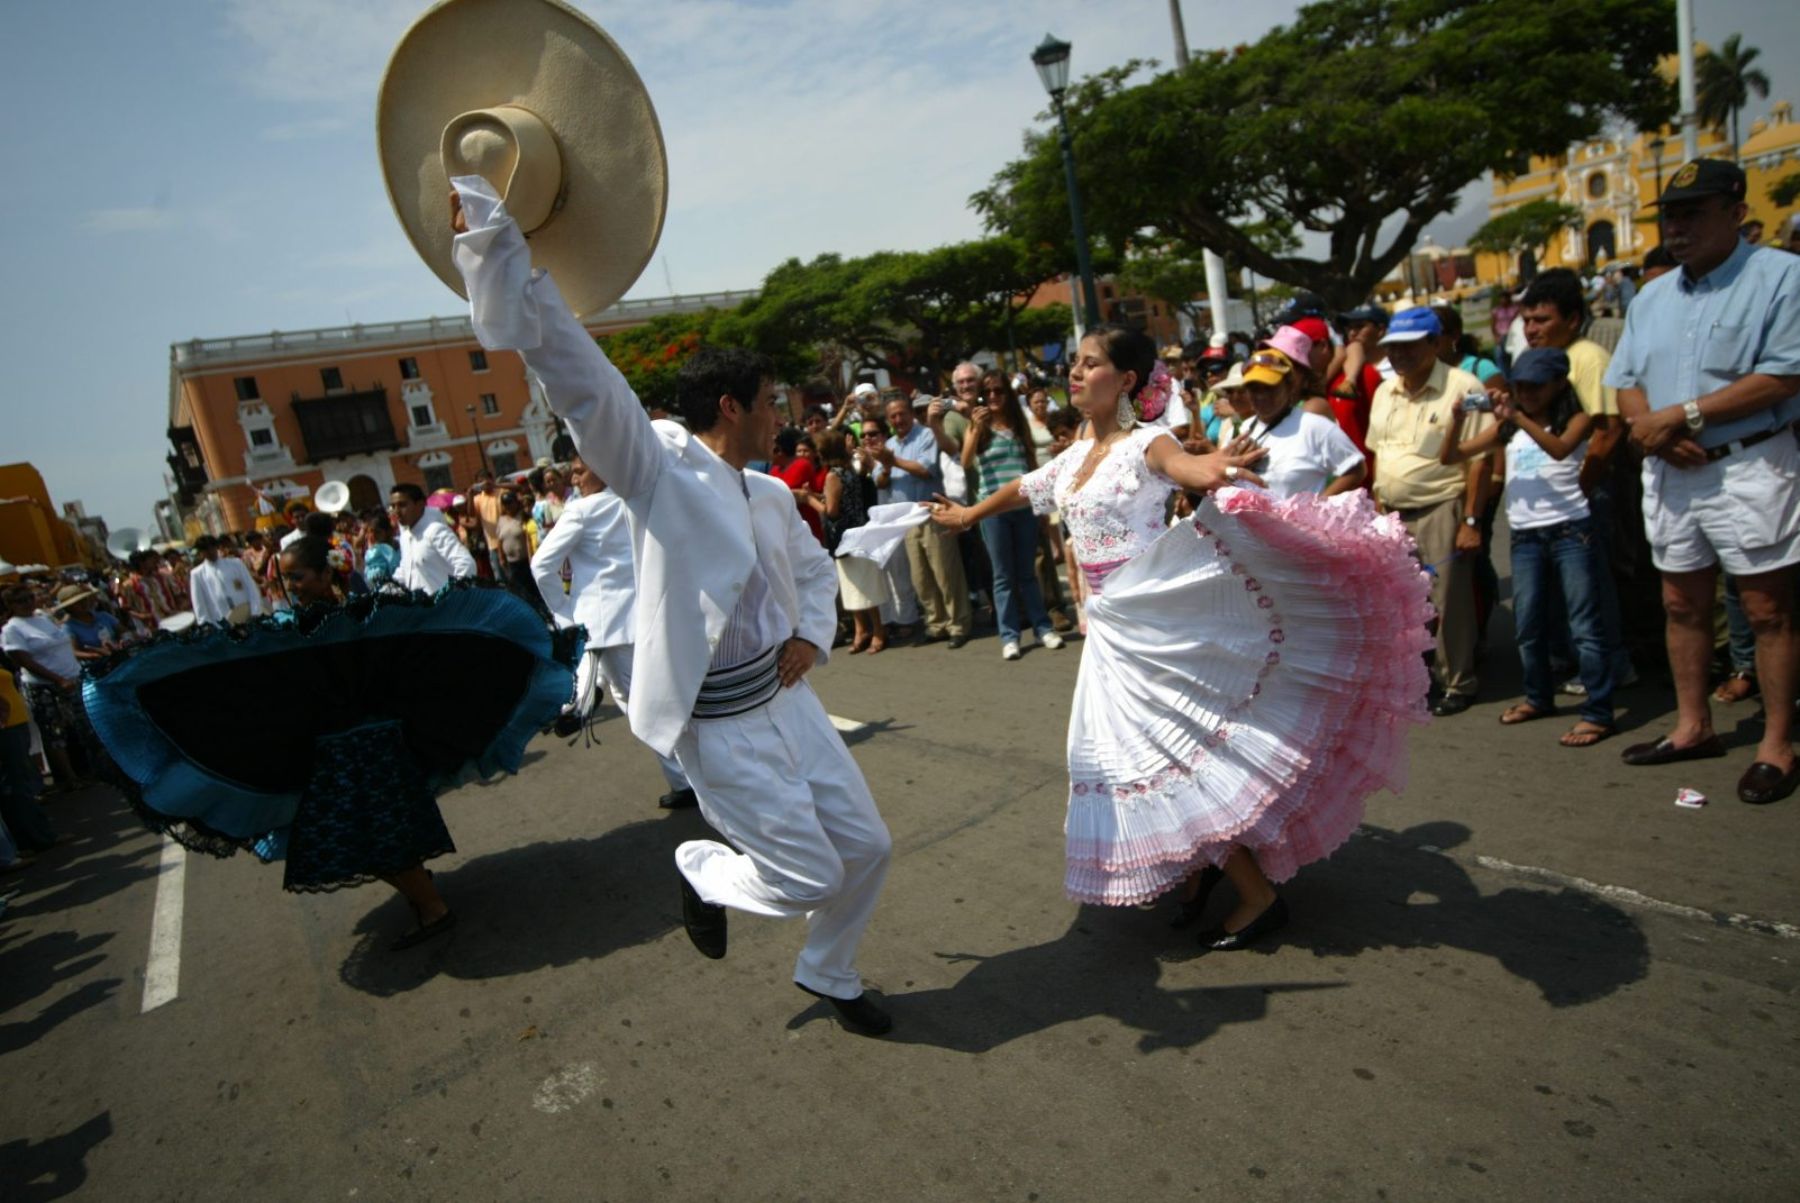 The Marinera is a Peruvian courtship dance, originally from the northern coastal areas of Peru, but now popular all over the country.